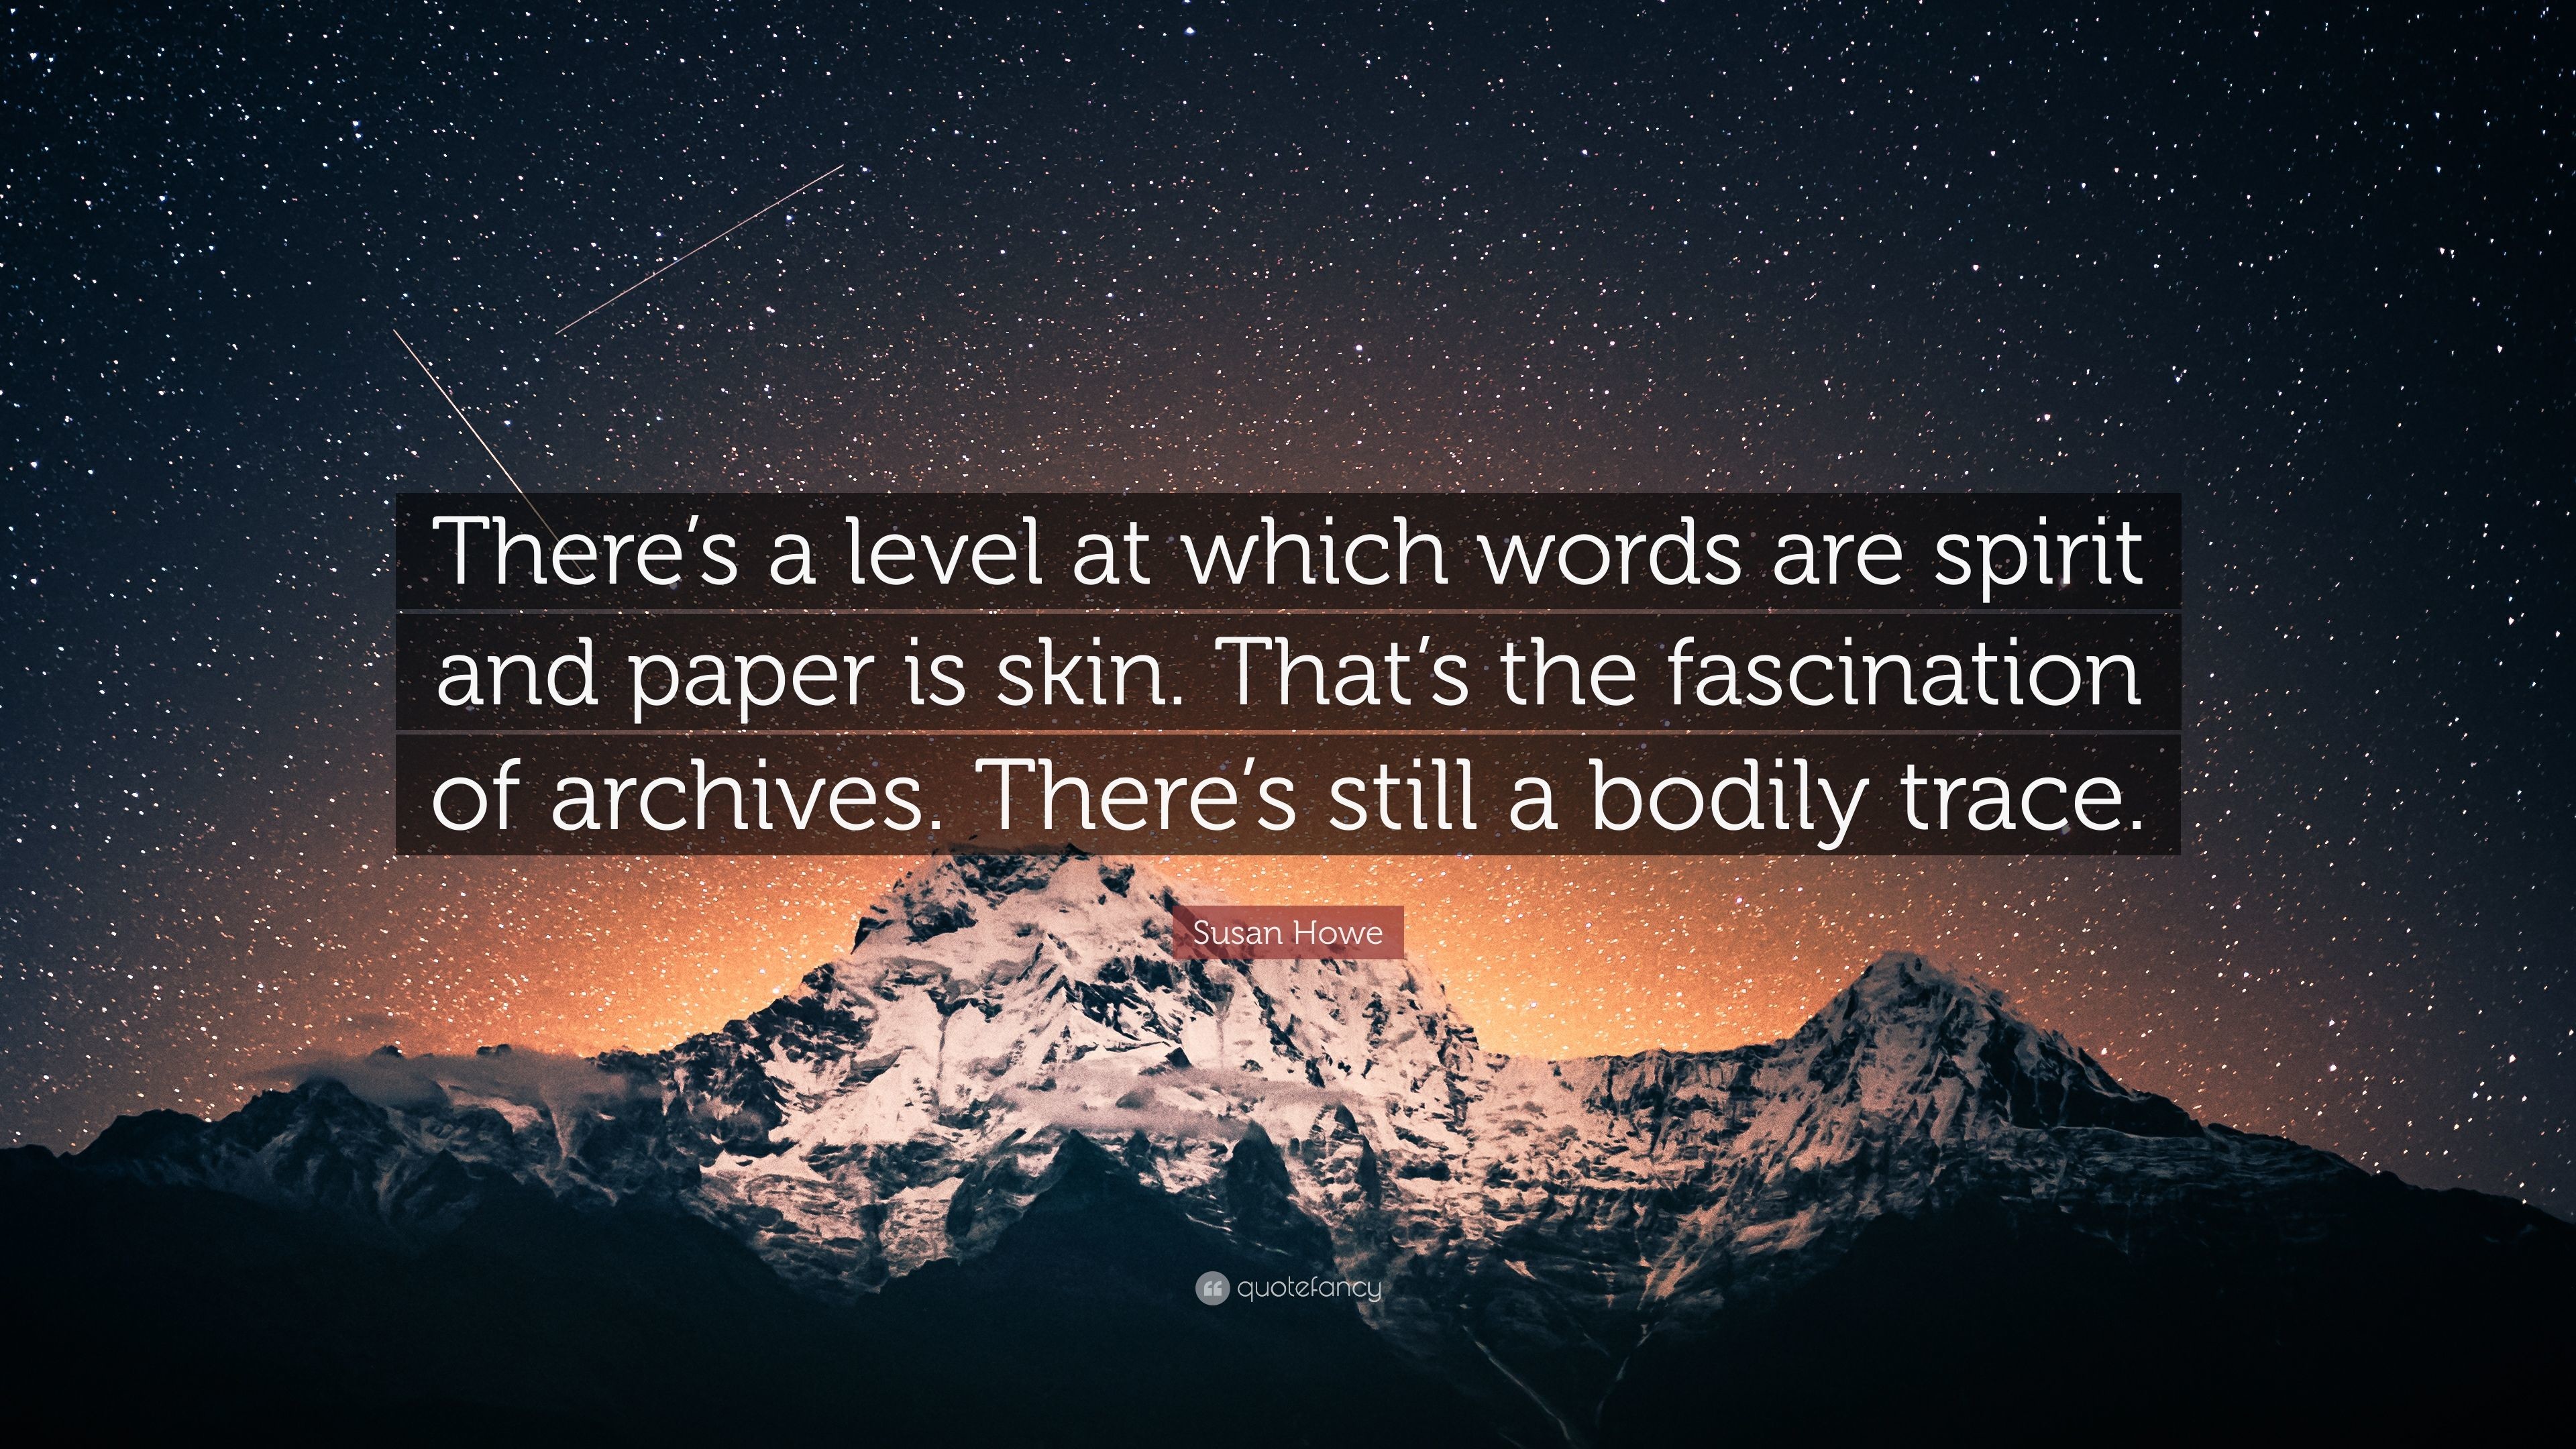 3840x2160 Susan Howe Quote: “There's a level at which words are spirit and paper is